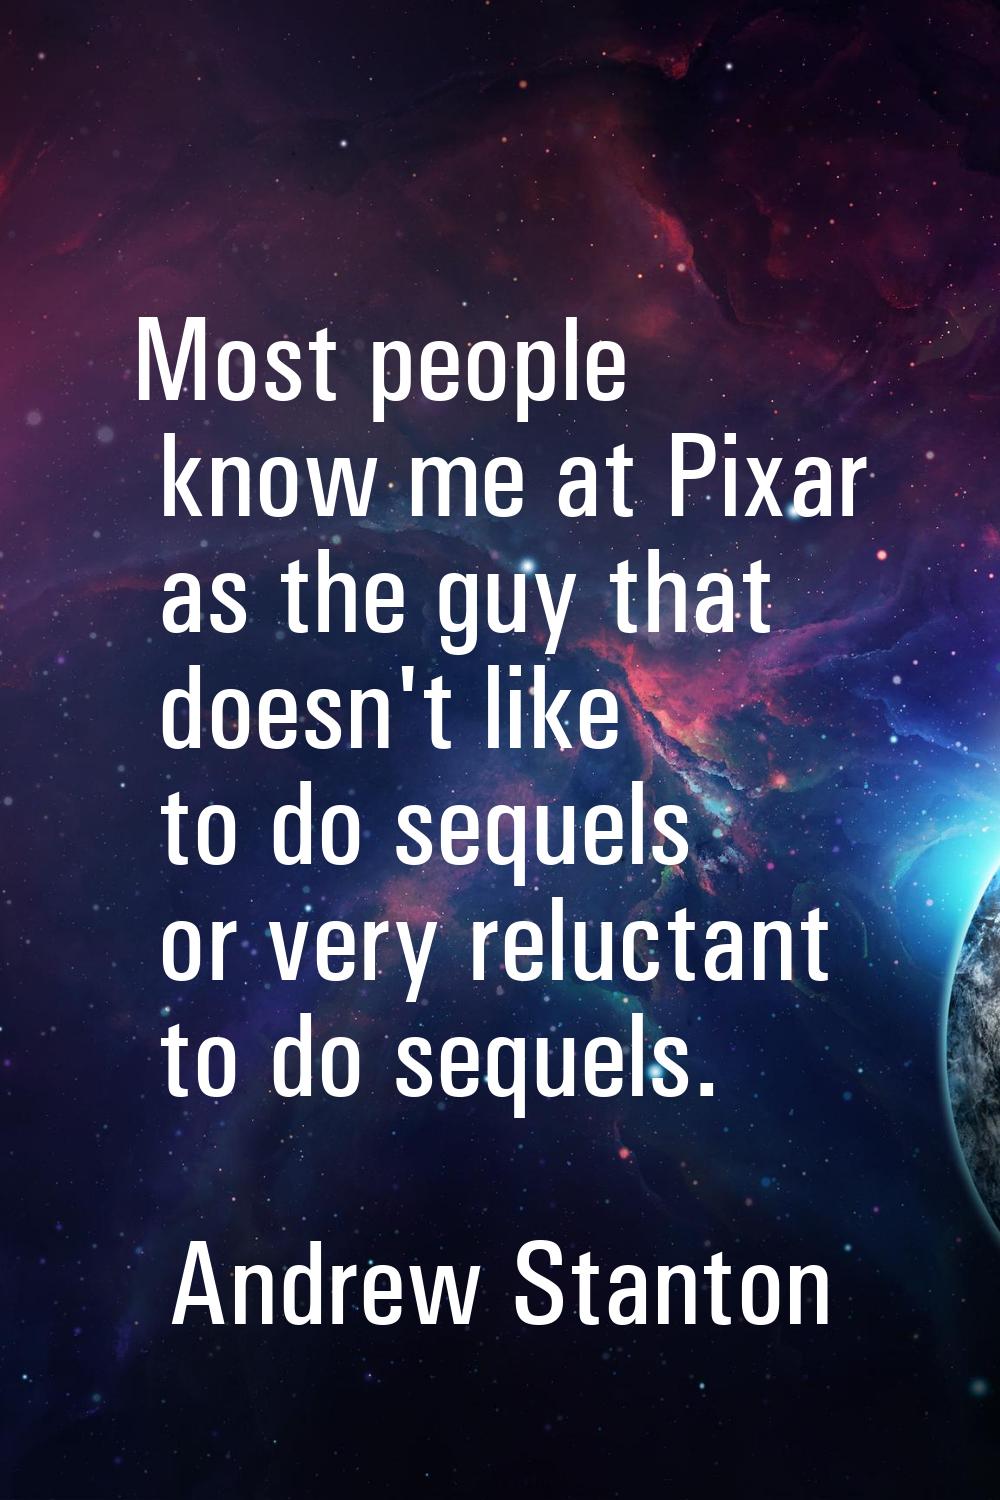 Most people know me at Pixar as the guy that doesn't like to do sequels or very reluctant to do seq